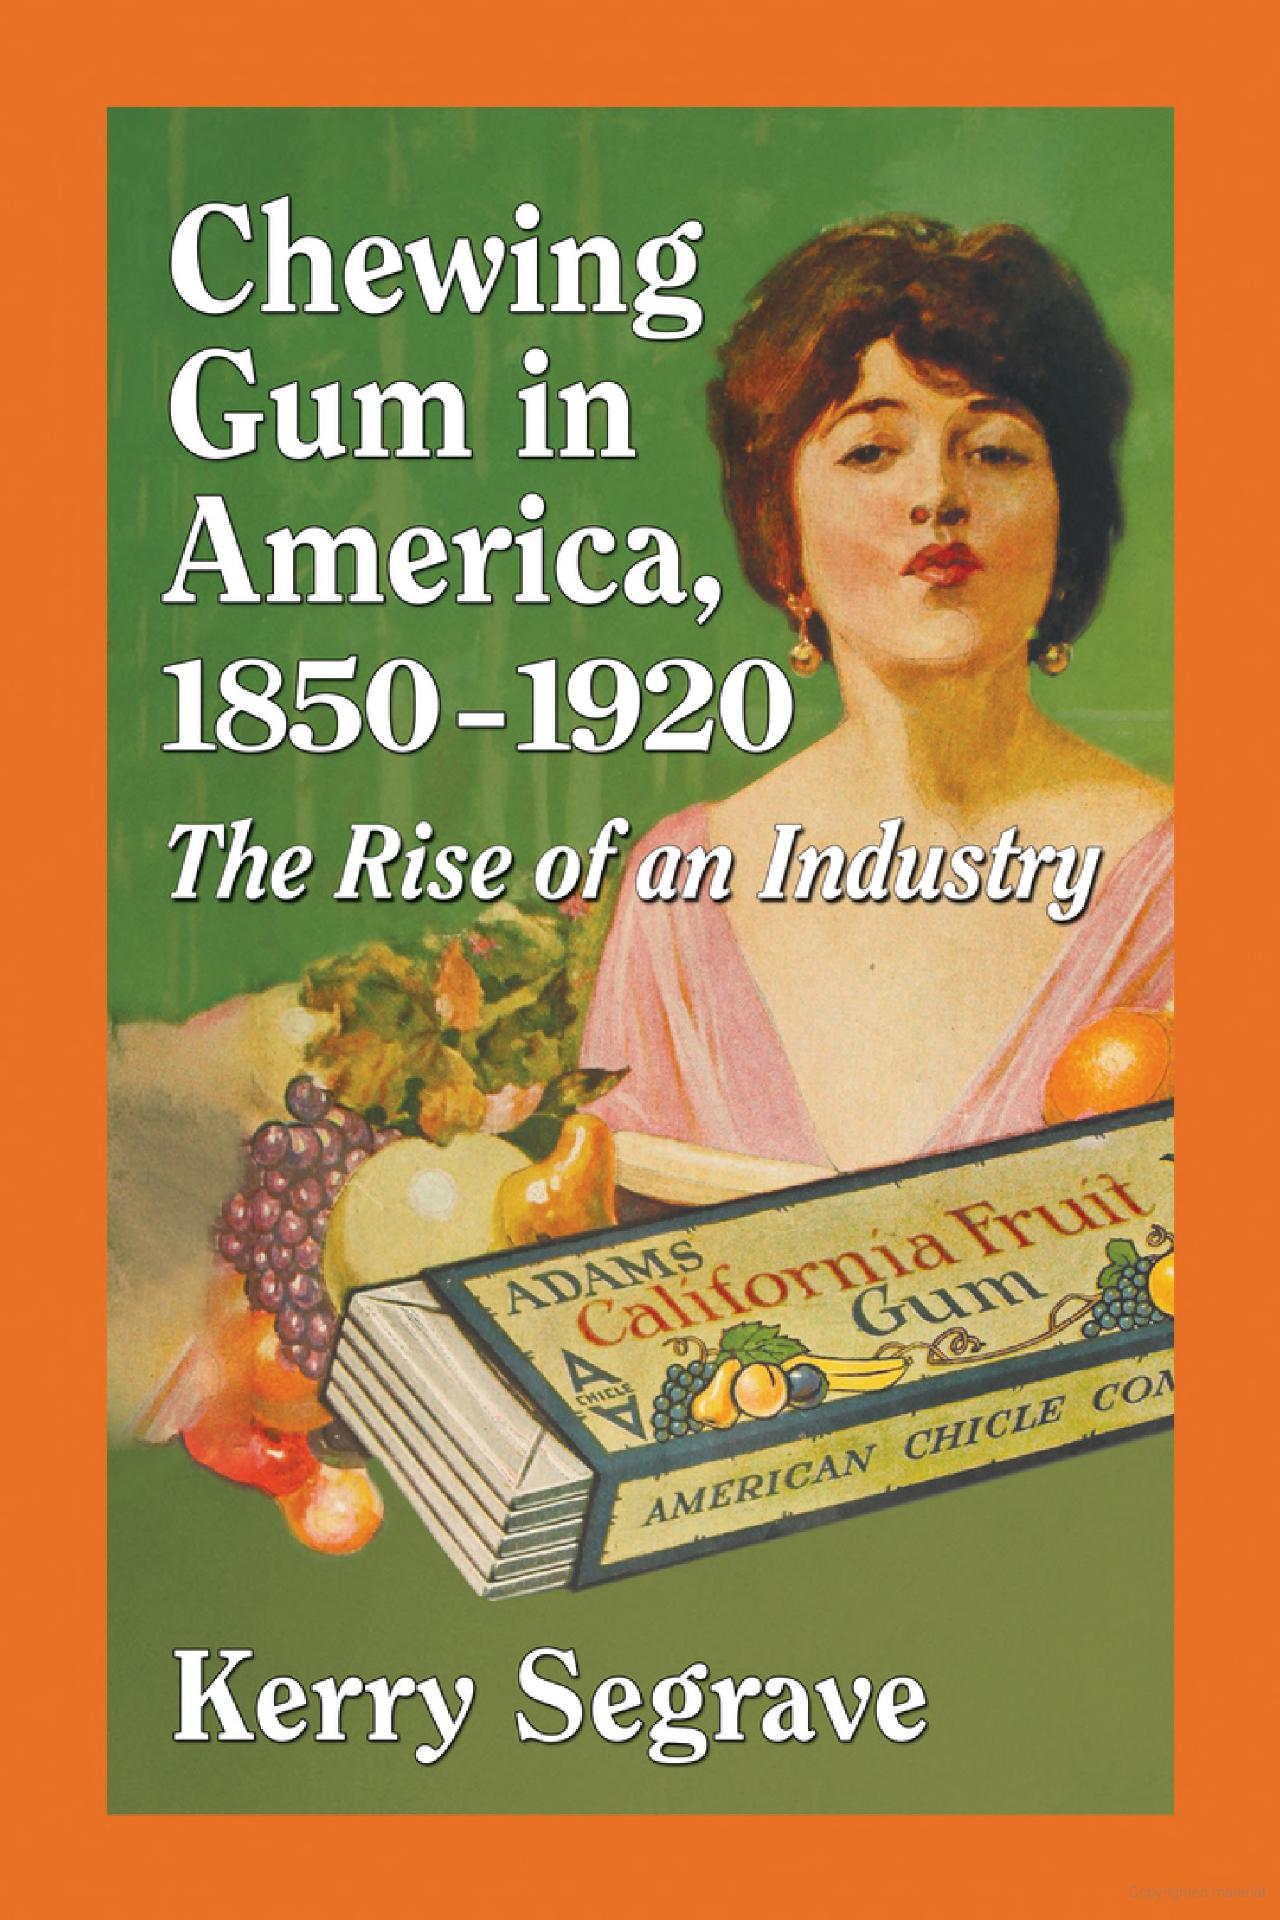 Chewing Gum in America 1850-1920: The Rise of an Industry